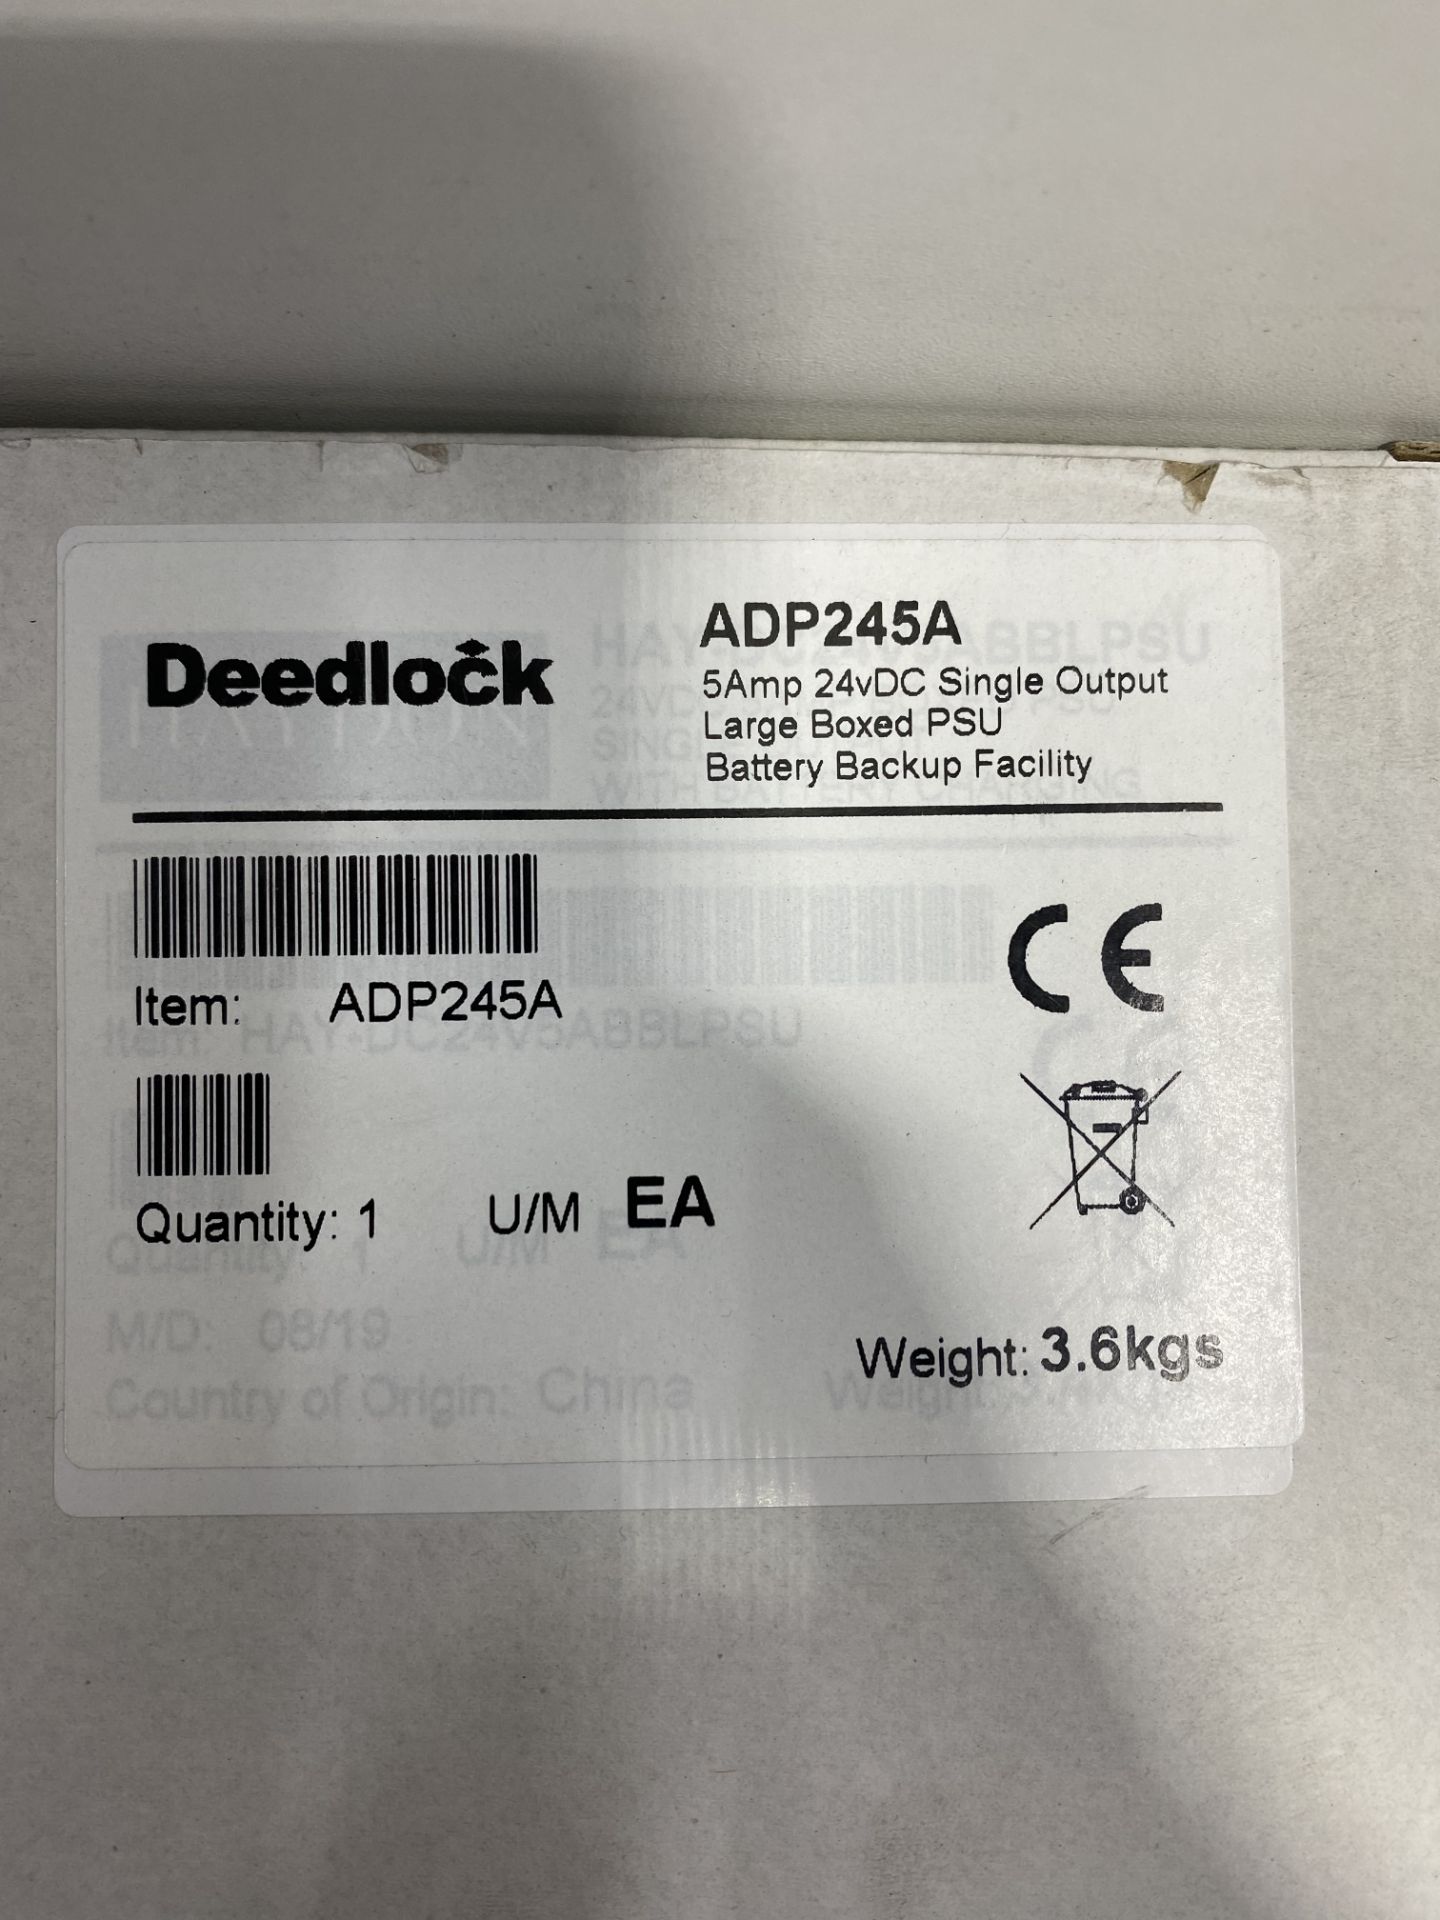 2 x DeedLock ADP245A 24v Single Output Power Supply Units - Image 4 of 4